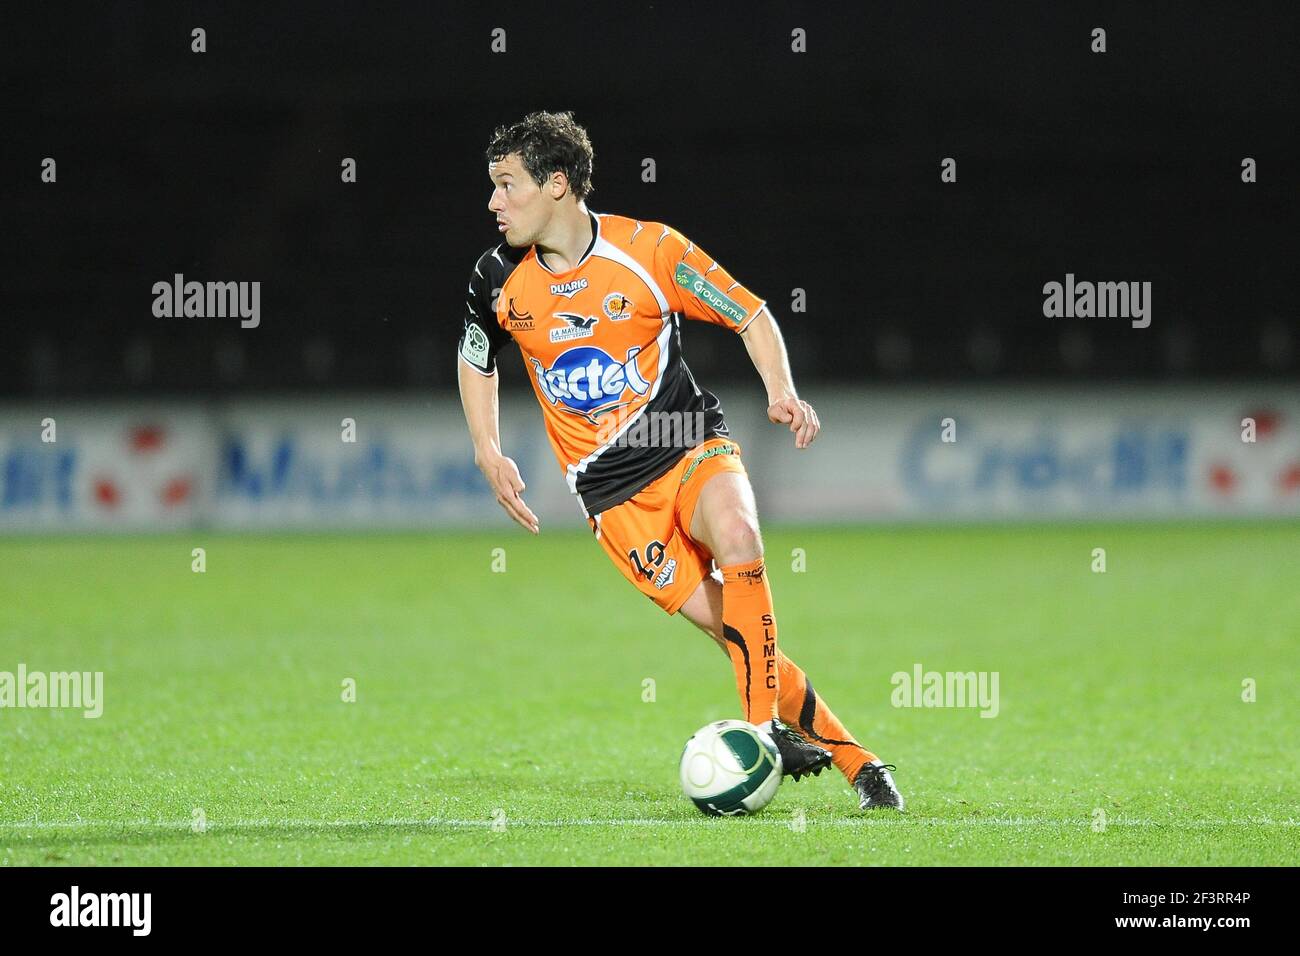 FOOTBALL - FRENCH CHAMPIONSHIP 2010/2011 - L2 - STADE LAVALLOIS v EVIAN TG - 09/05/2011 - PHOTO PASCAL ALLEE / DPPI - PIERRE TALMONT (LAV) Stock Photo